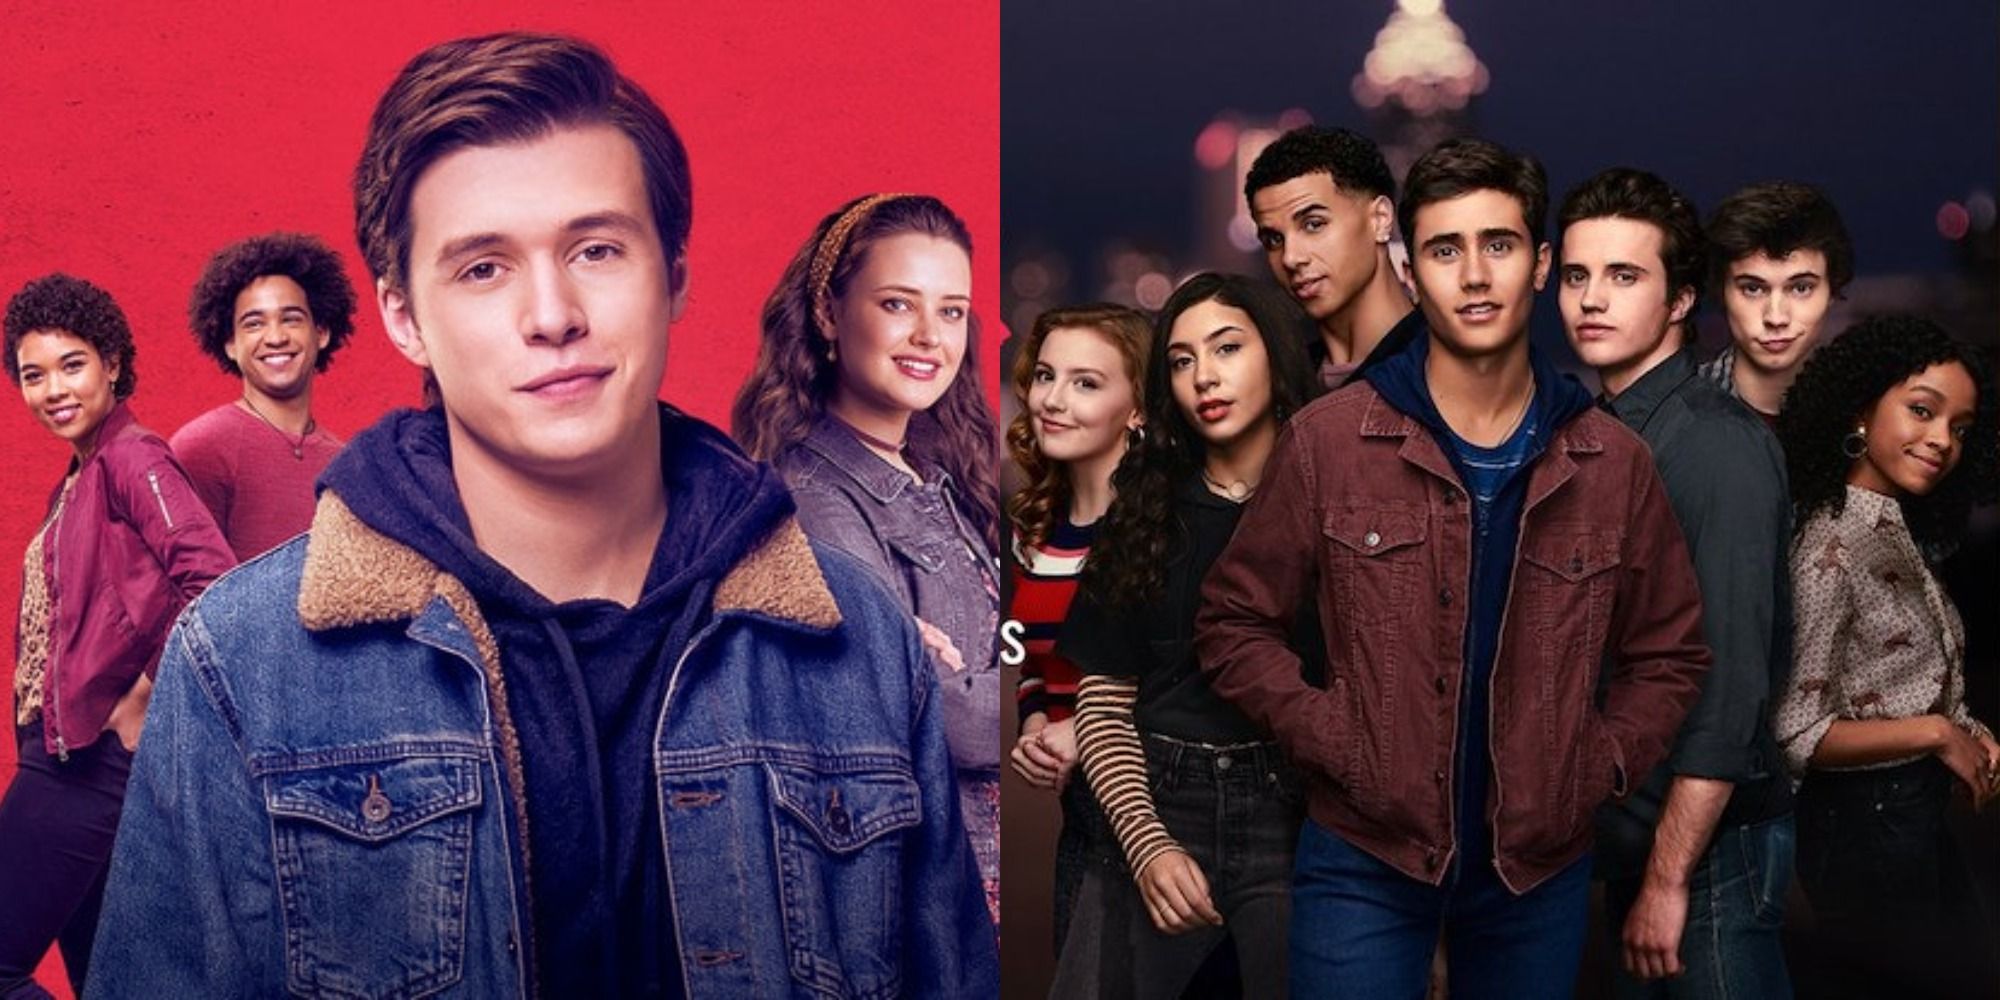 Split image showing the casts of Love, Simon and Love, Victor